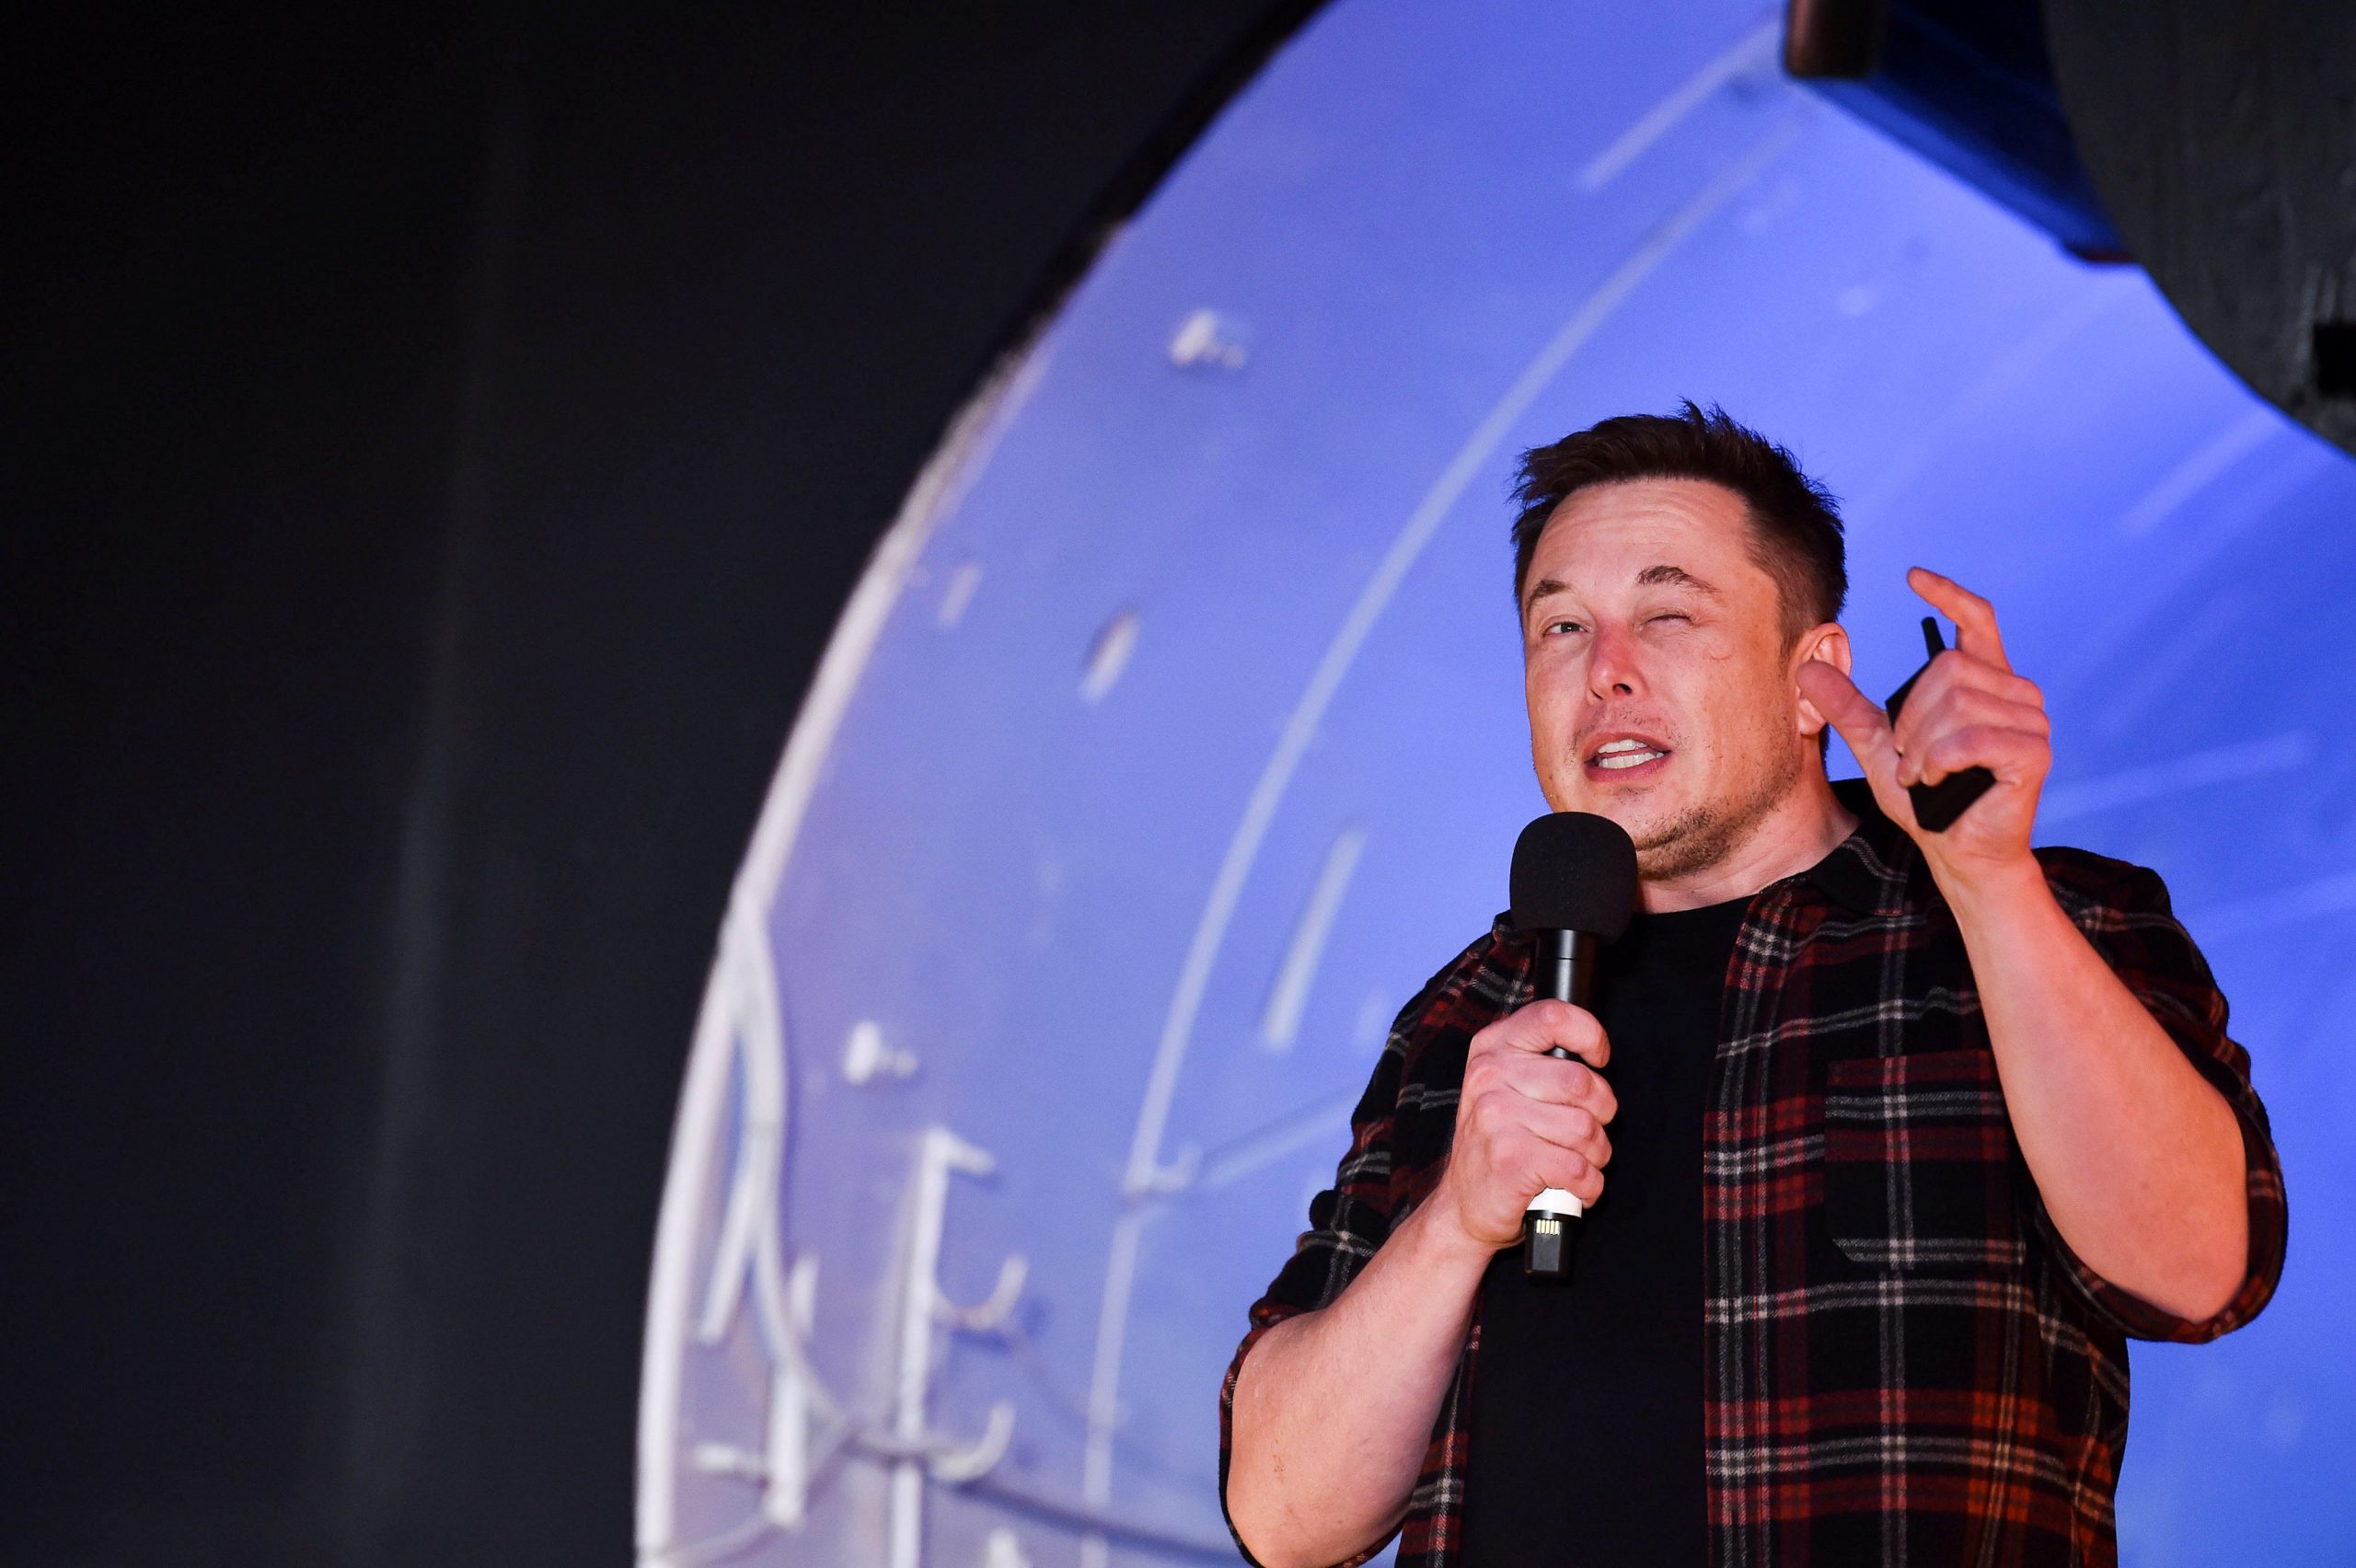 The Boring Company founder Elon Musk talks into a microphone in front of a tunnel lit in blue